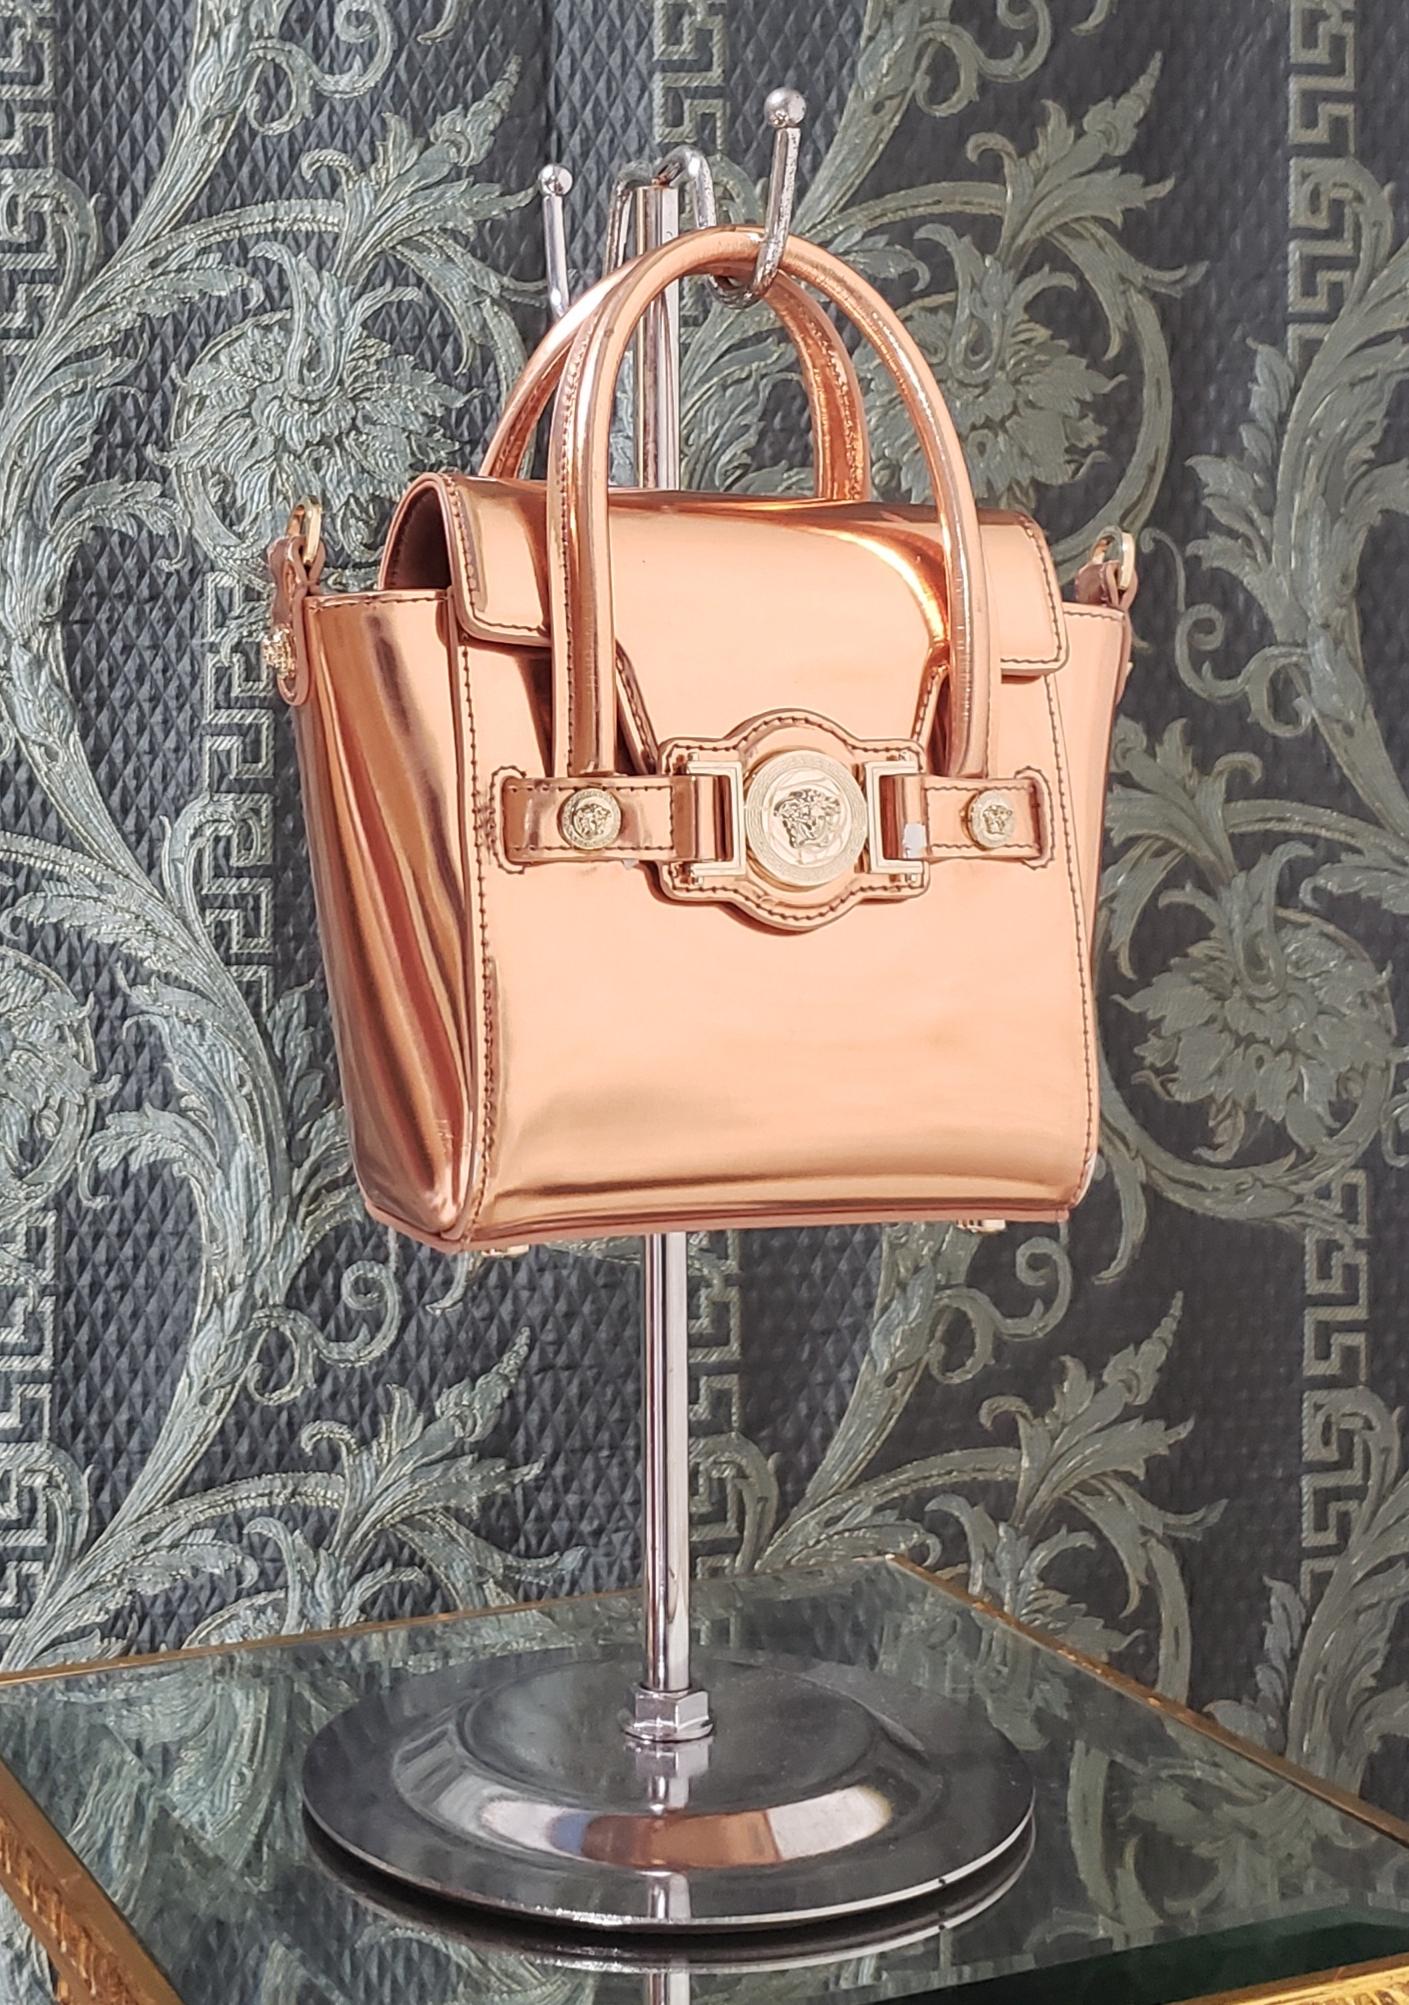 VERSACE 


Patent leather plated with rose gold foil bag

Gold-plated Medusa hardware 



Removable shoulder strap. Can be carried over the shoulder, cross-body or as a clutch.

7 1/2